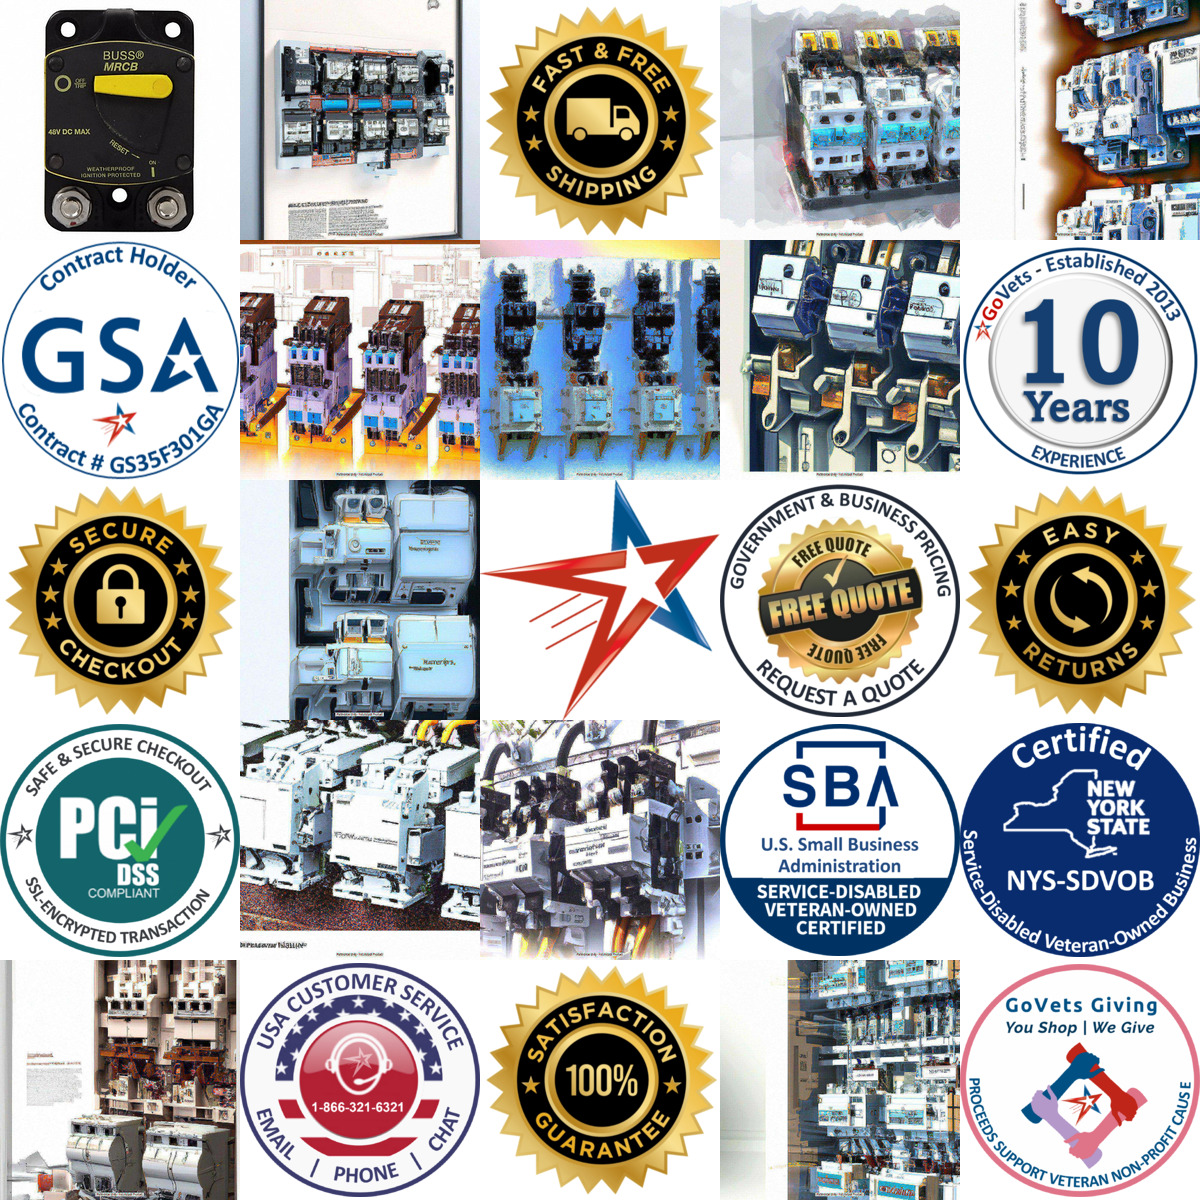 A selection of Automotive Circuit Breakers products on GoVets